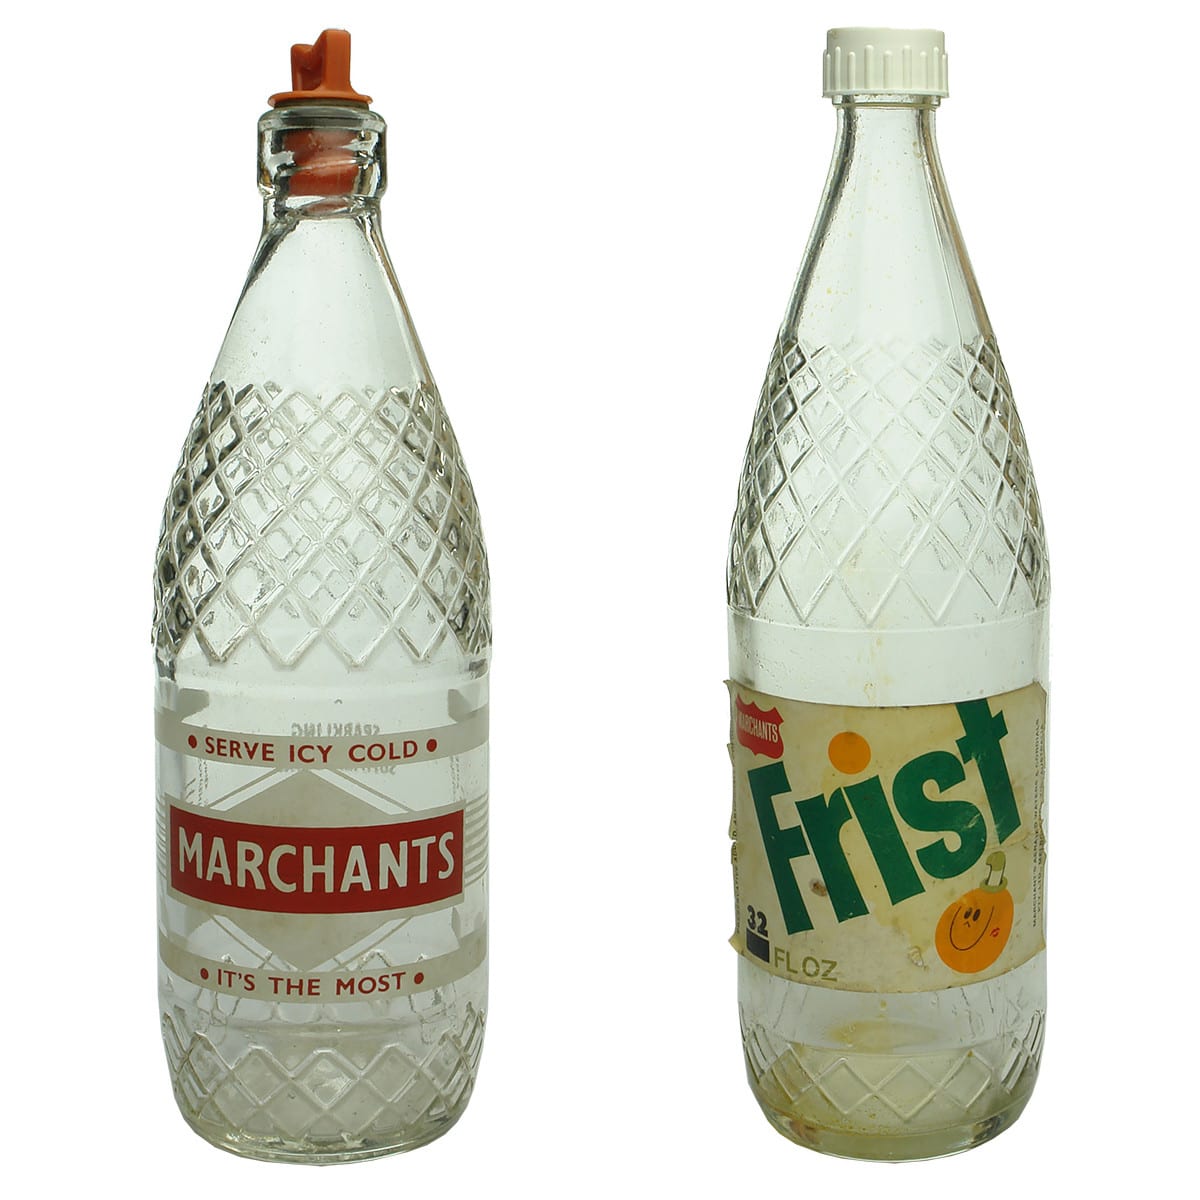 Pair of Marchants Melbourne Bottles. Ceramic Label Internal Thread and Paper Labelled Frist screw top. (Victoria)